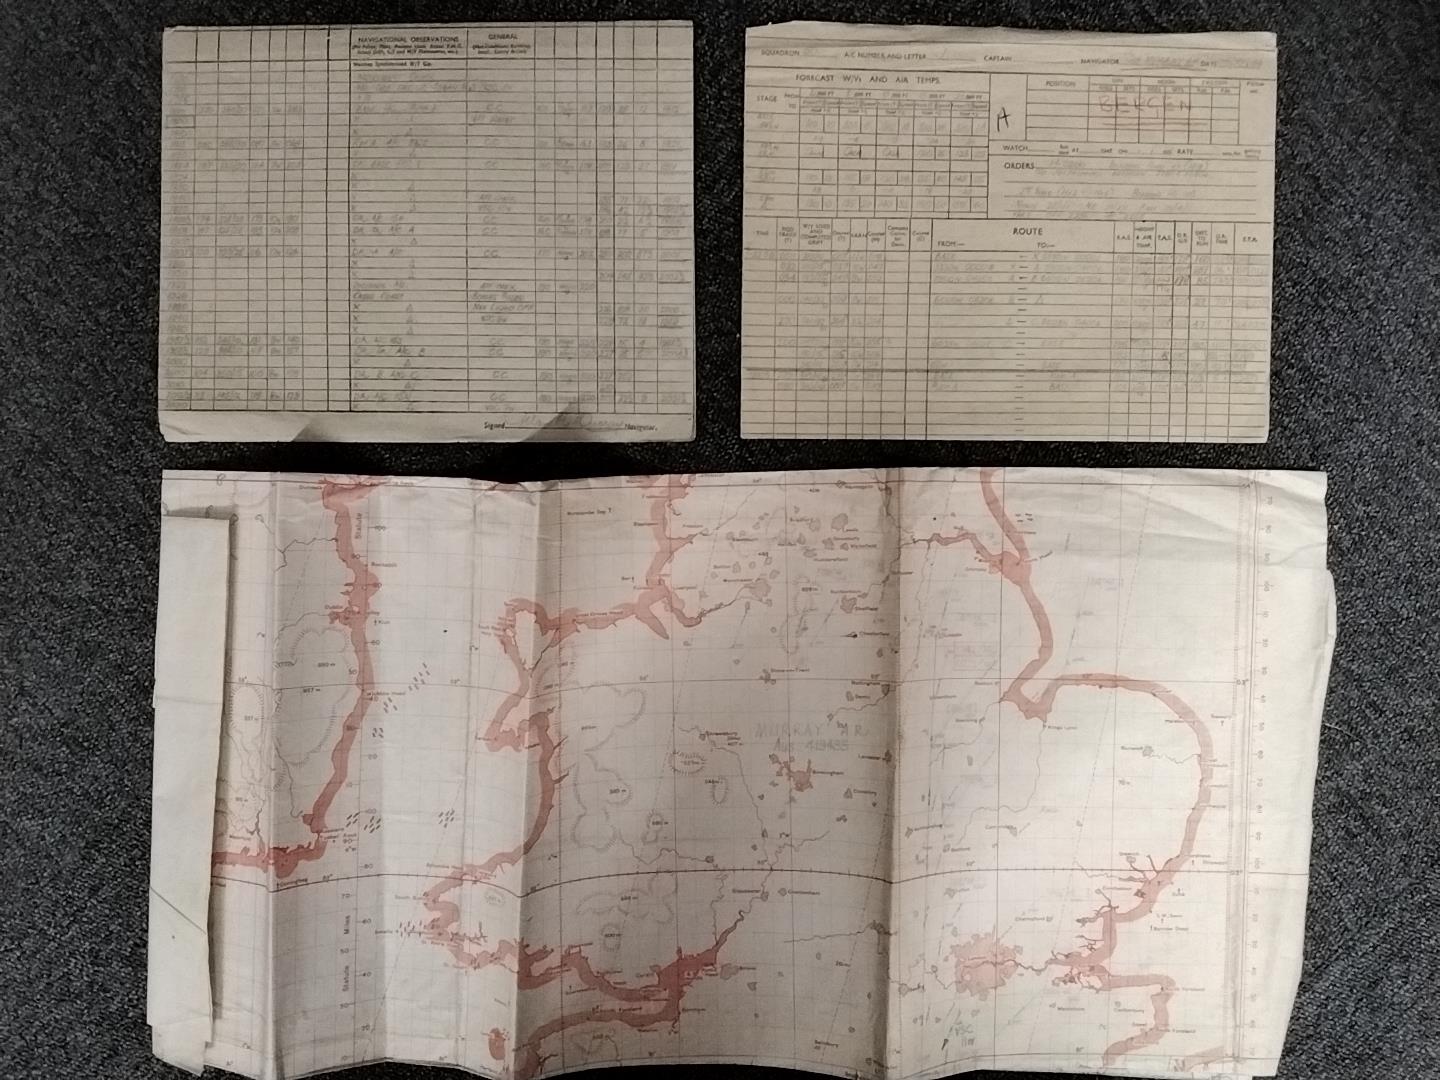 WWII Logs & Chart. WWII navigation logs and chart kept by Flight Sergeant Alan Murray, 50 Squadron